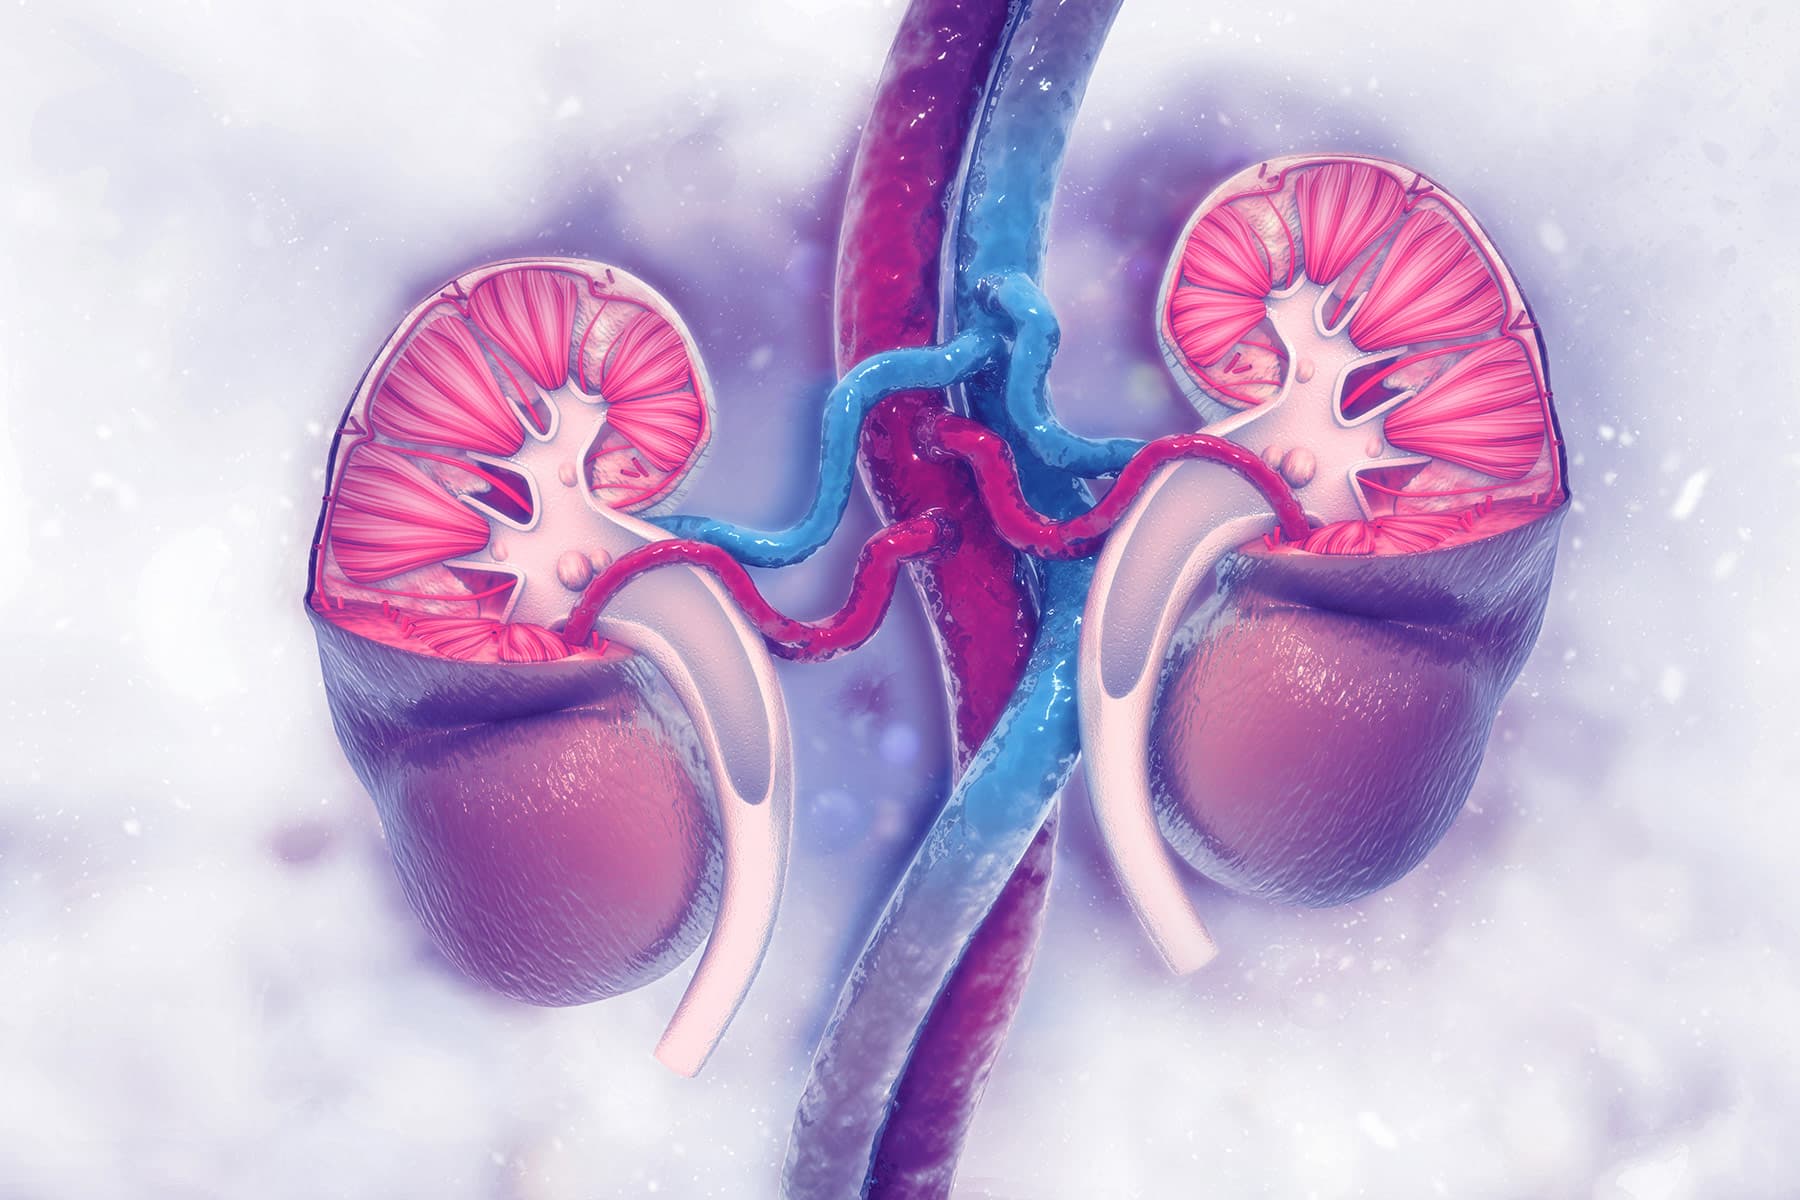 Kidney Damage Another Consequence of 'Long COVID'